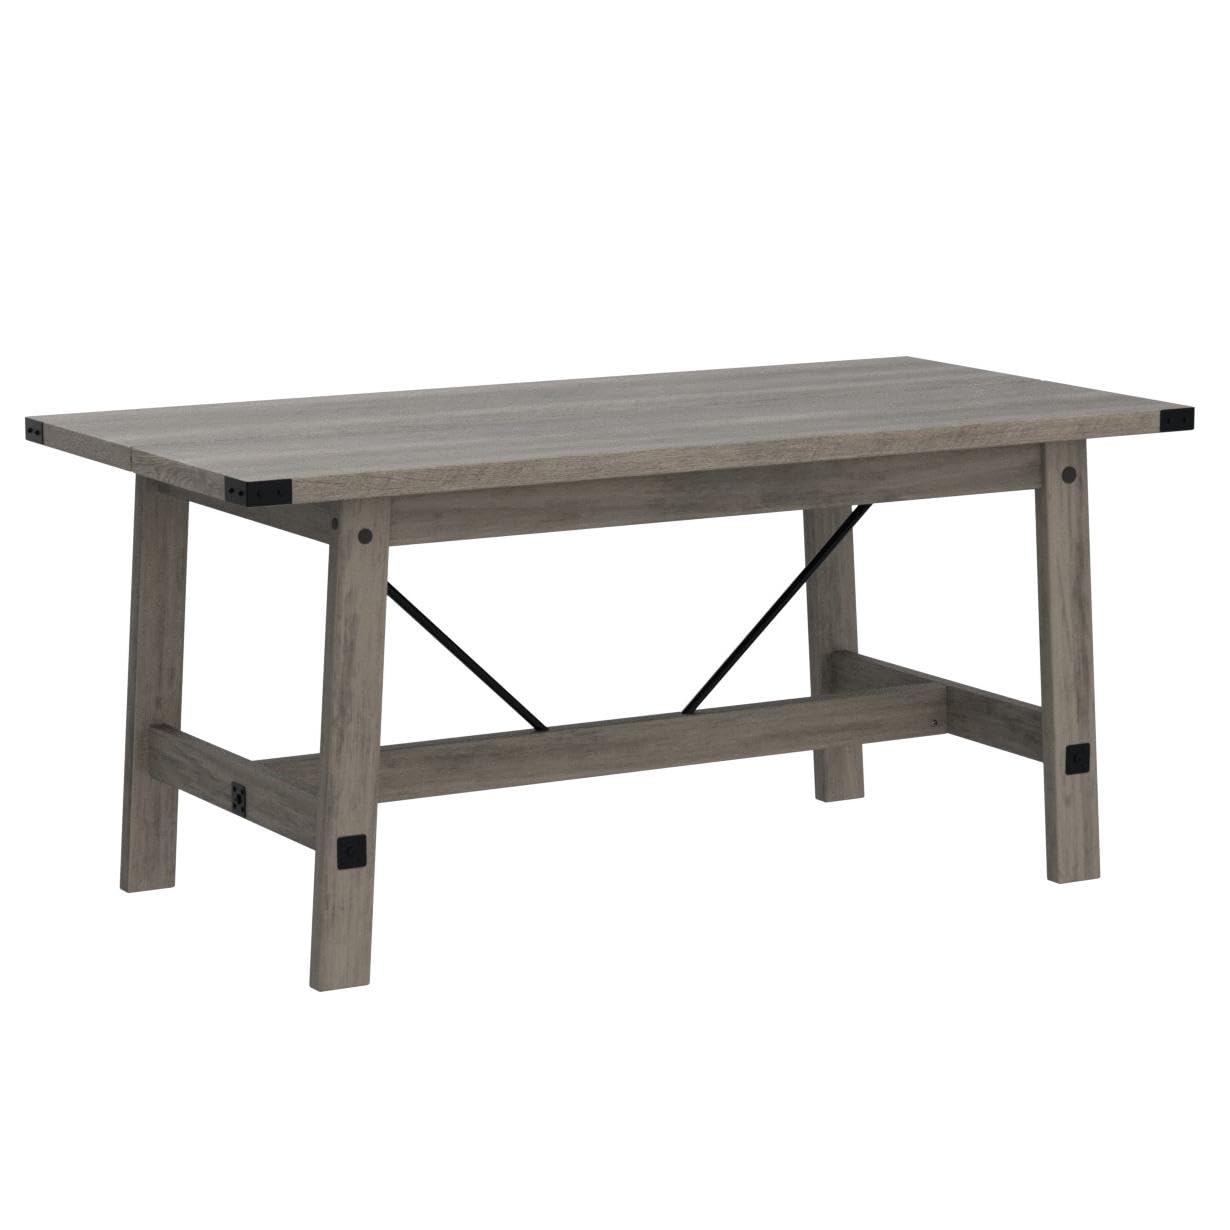 WAMPAT 6 Person Modern Dining Room Table, 67.7 Inch Rectangular Wood Kitchen Table, Rustic Grey